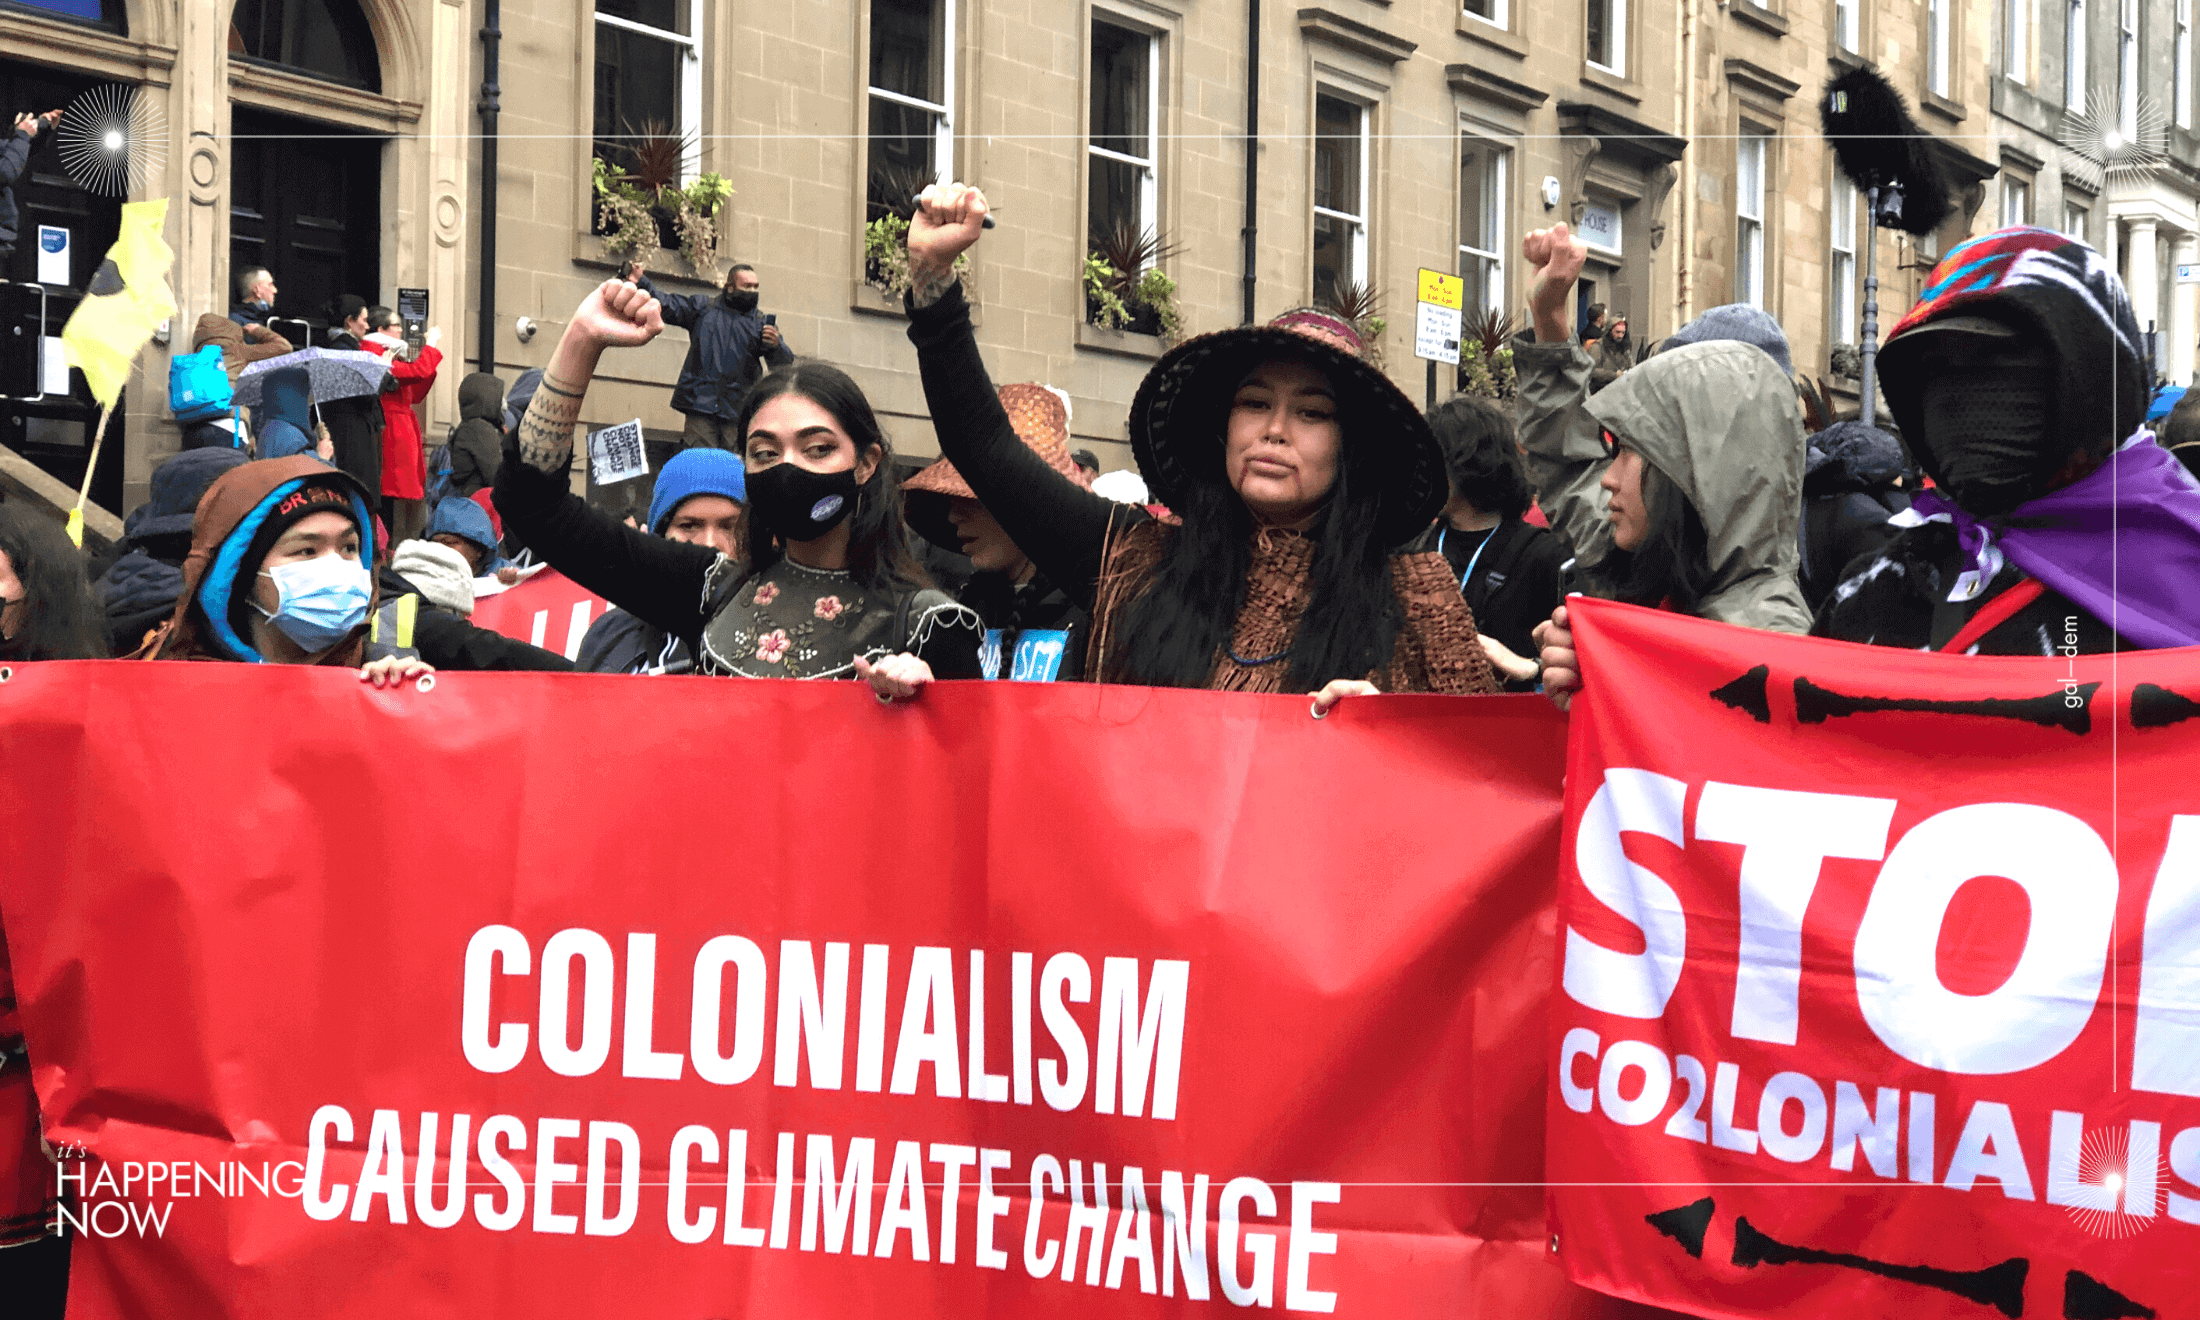 ‘We contribute the least and face the most effects’: the Global South leads Glasgow climate protest